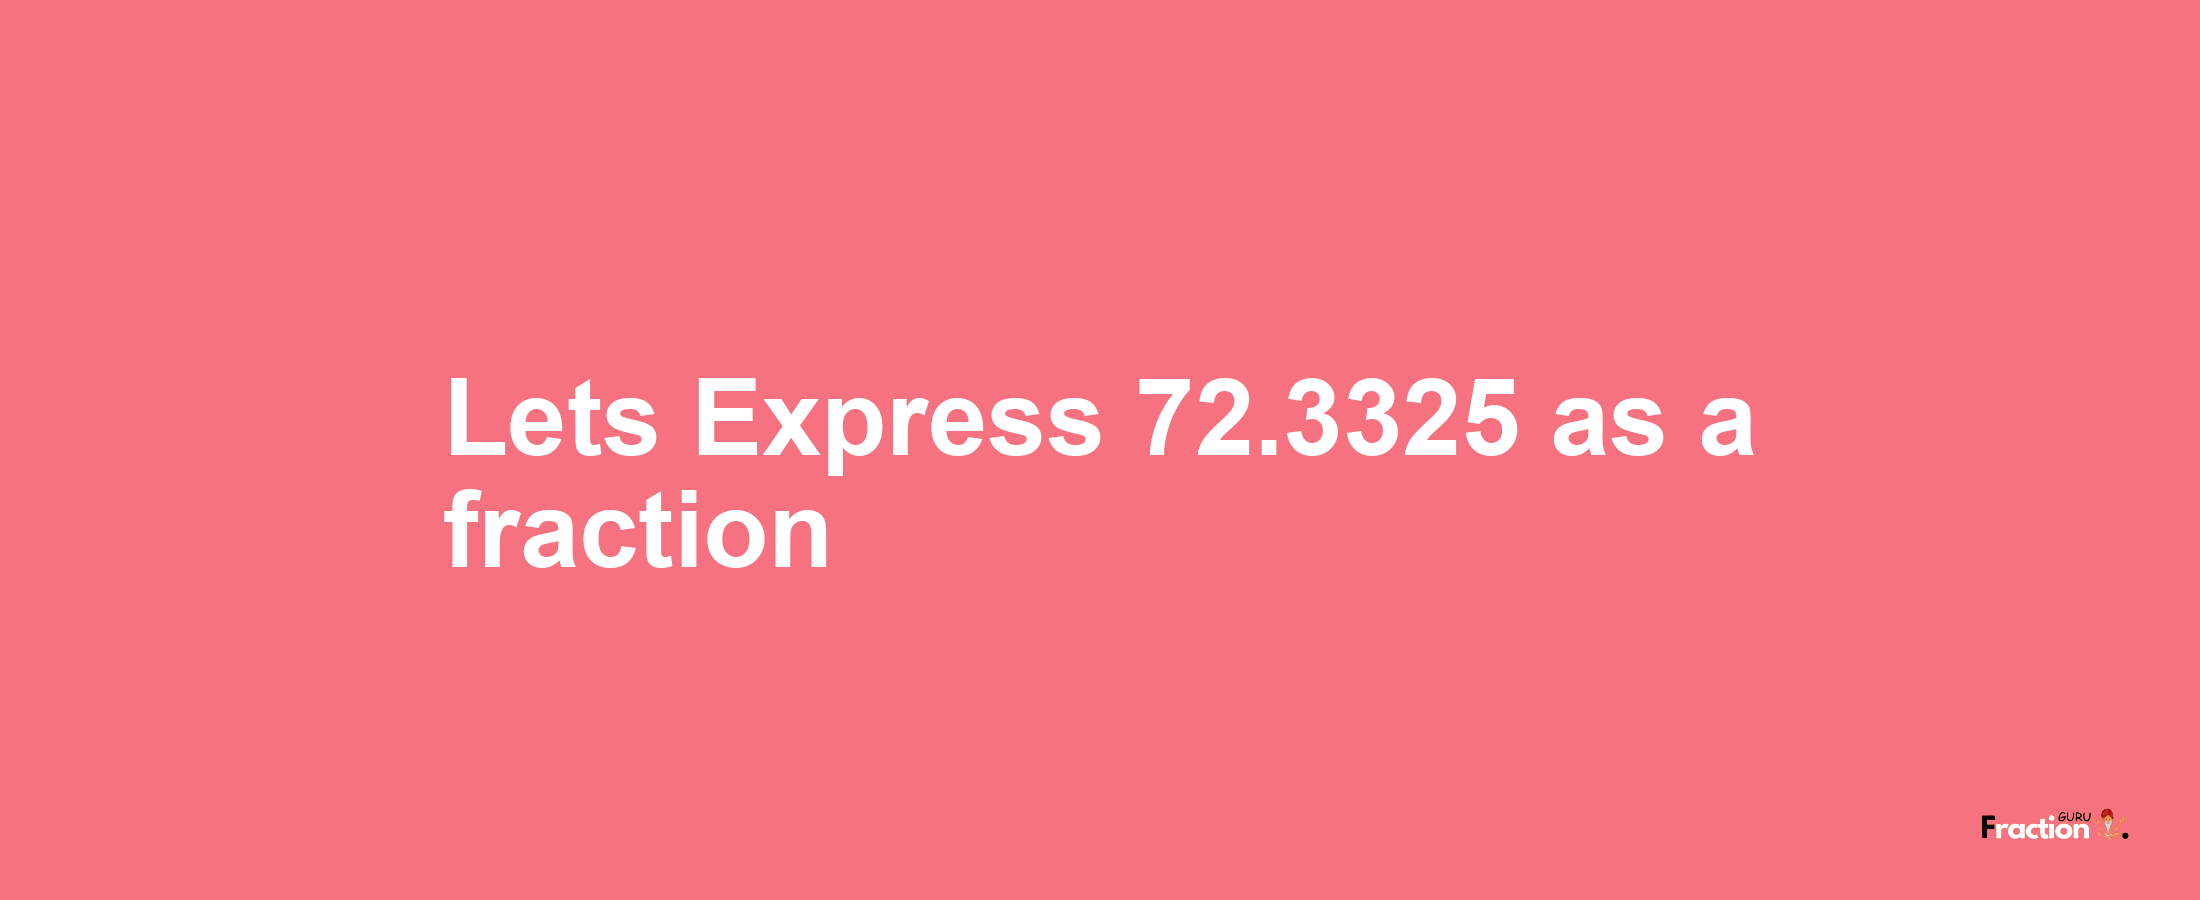 Lets Express 72.3325 as afraction